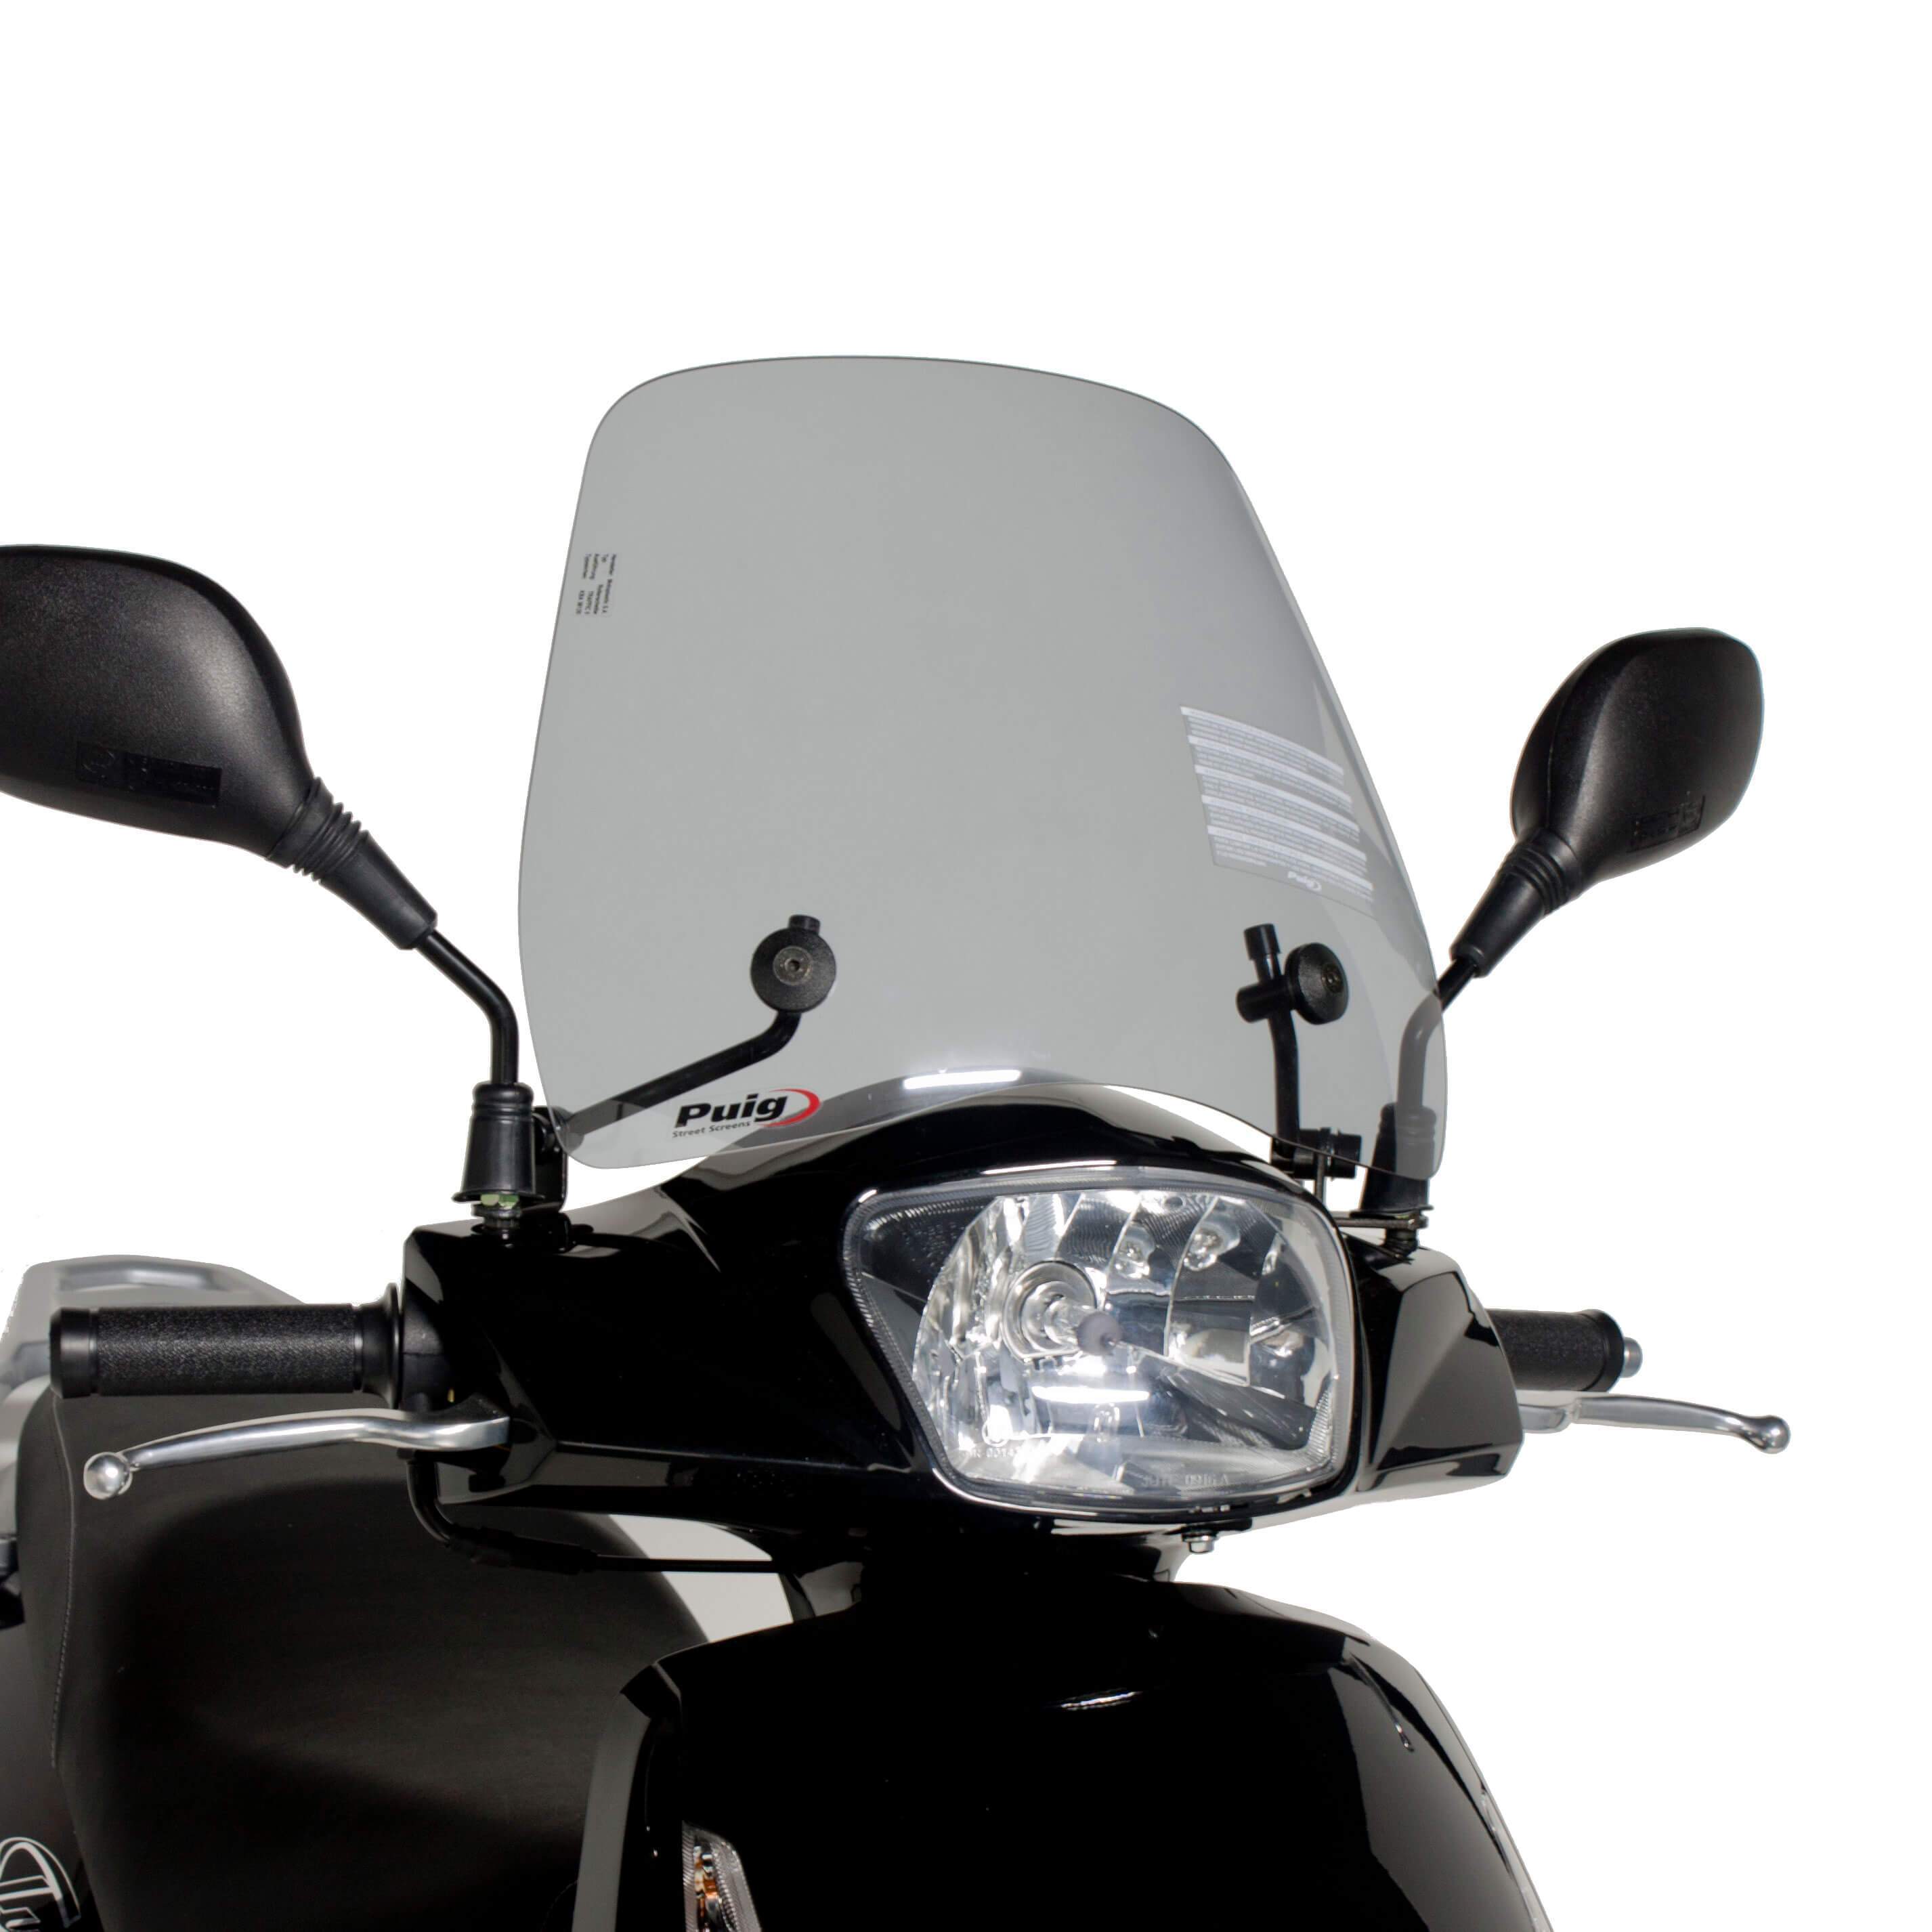 Puig Trafic Screen | Light Smoke | Peugeot Tweet 125 Evo RS 2012>Current-M5874H-Screens-Pyramid Motorcycle Accessories